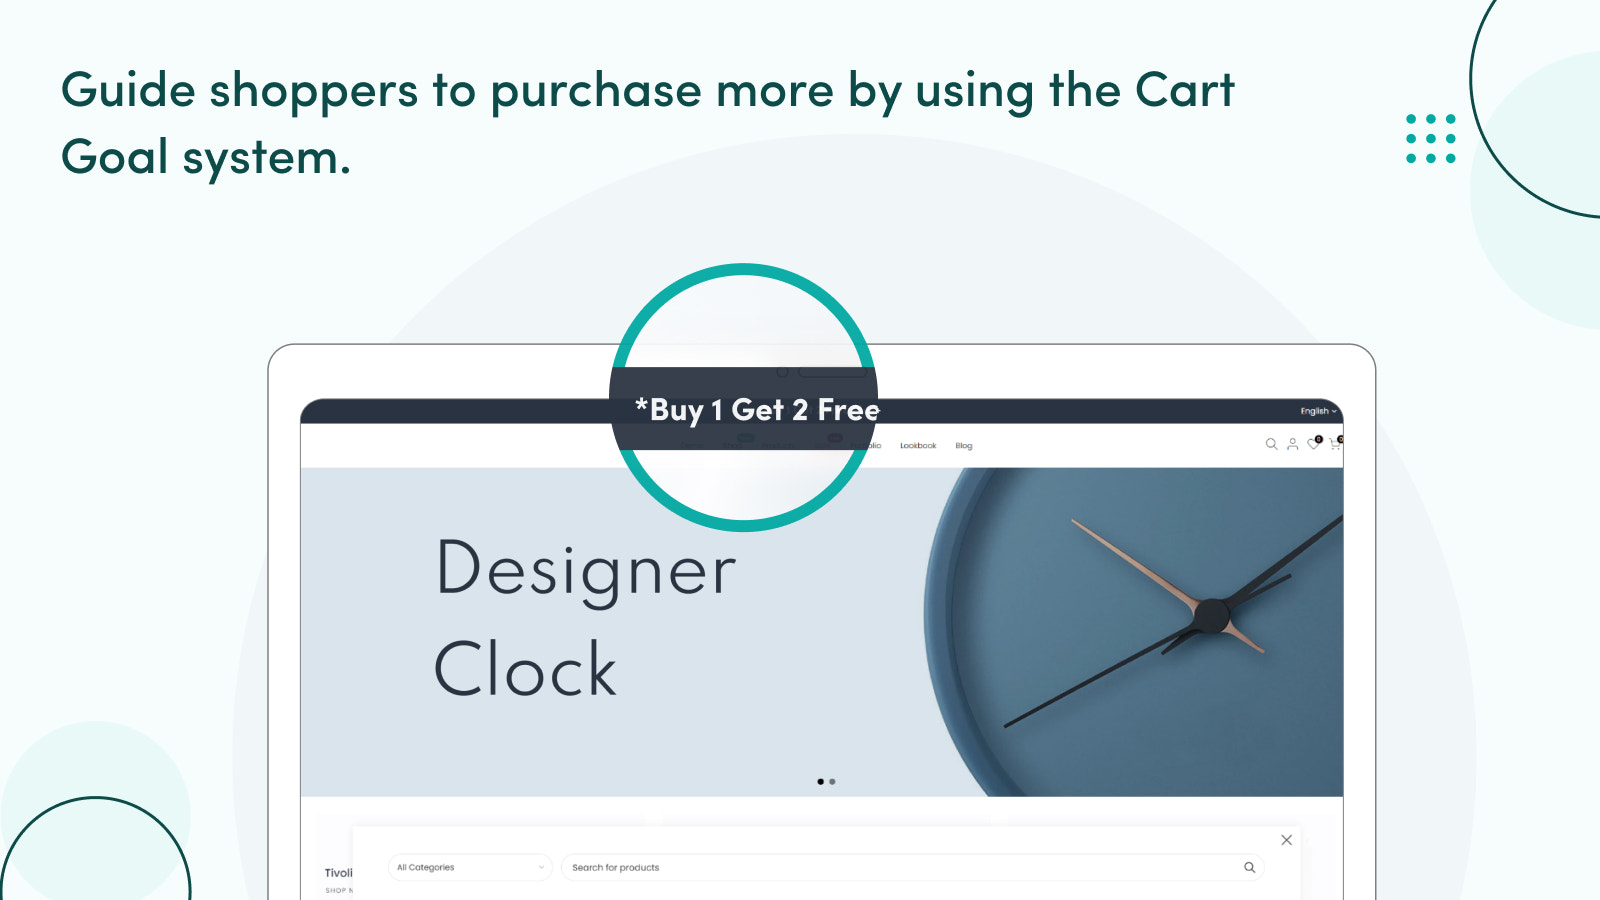 Increase cart value with the Cart goal system.